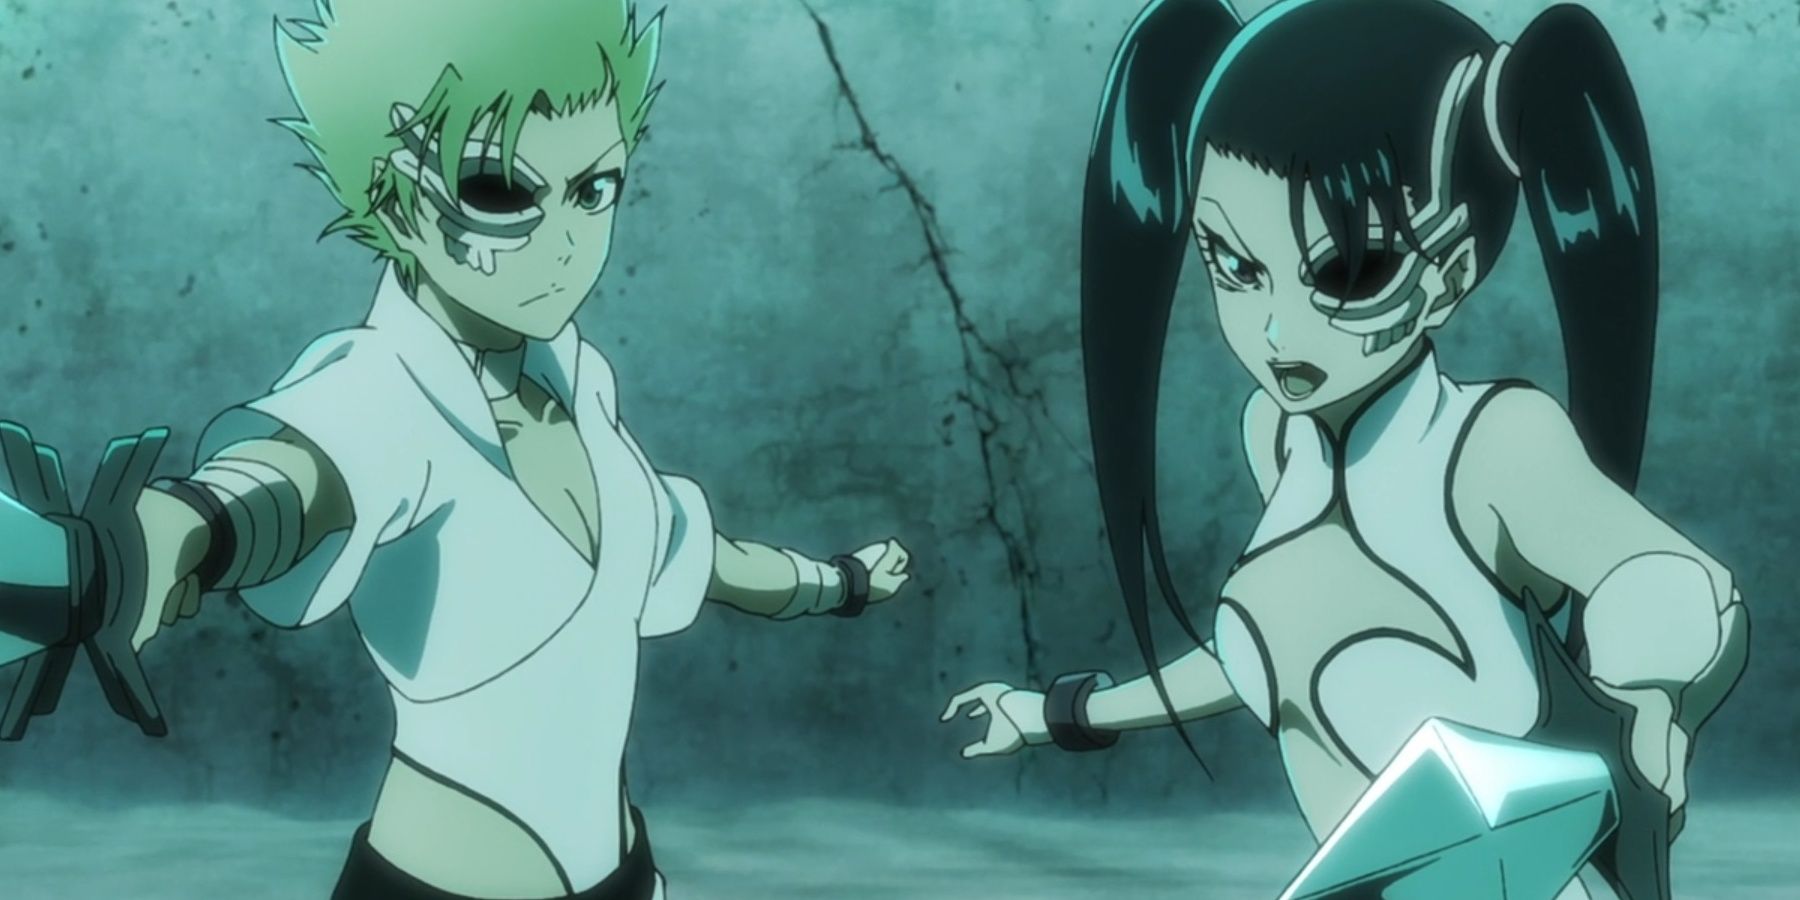 Loly and Menoly holding their zanpakuto